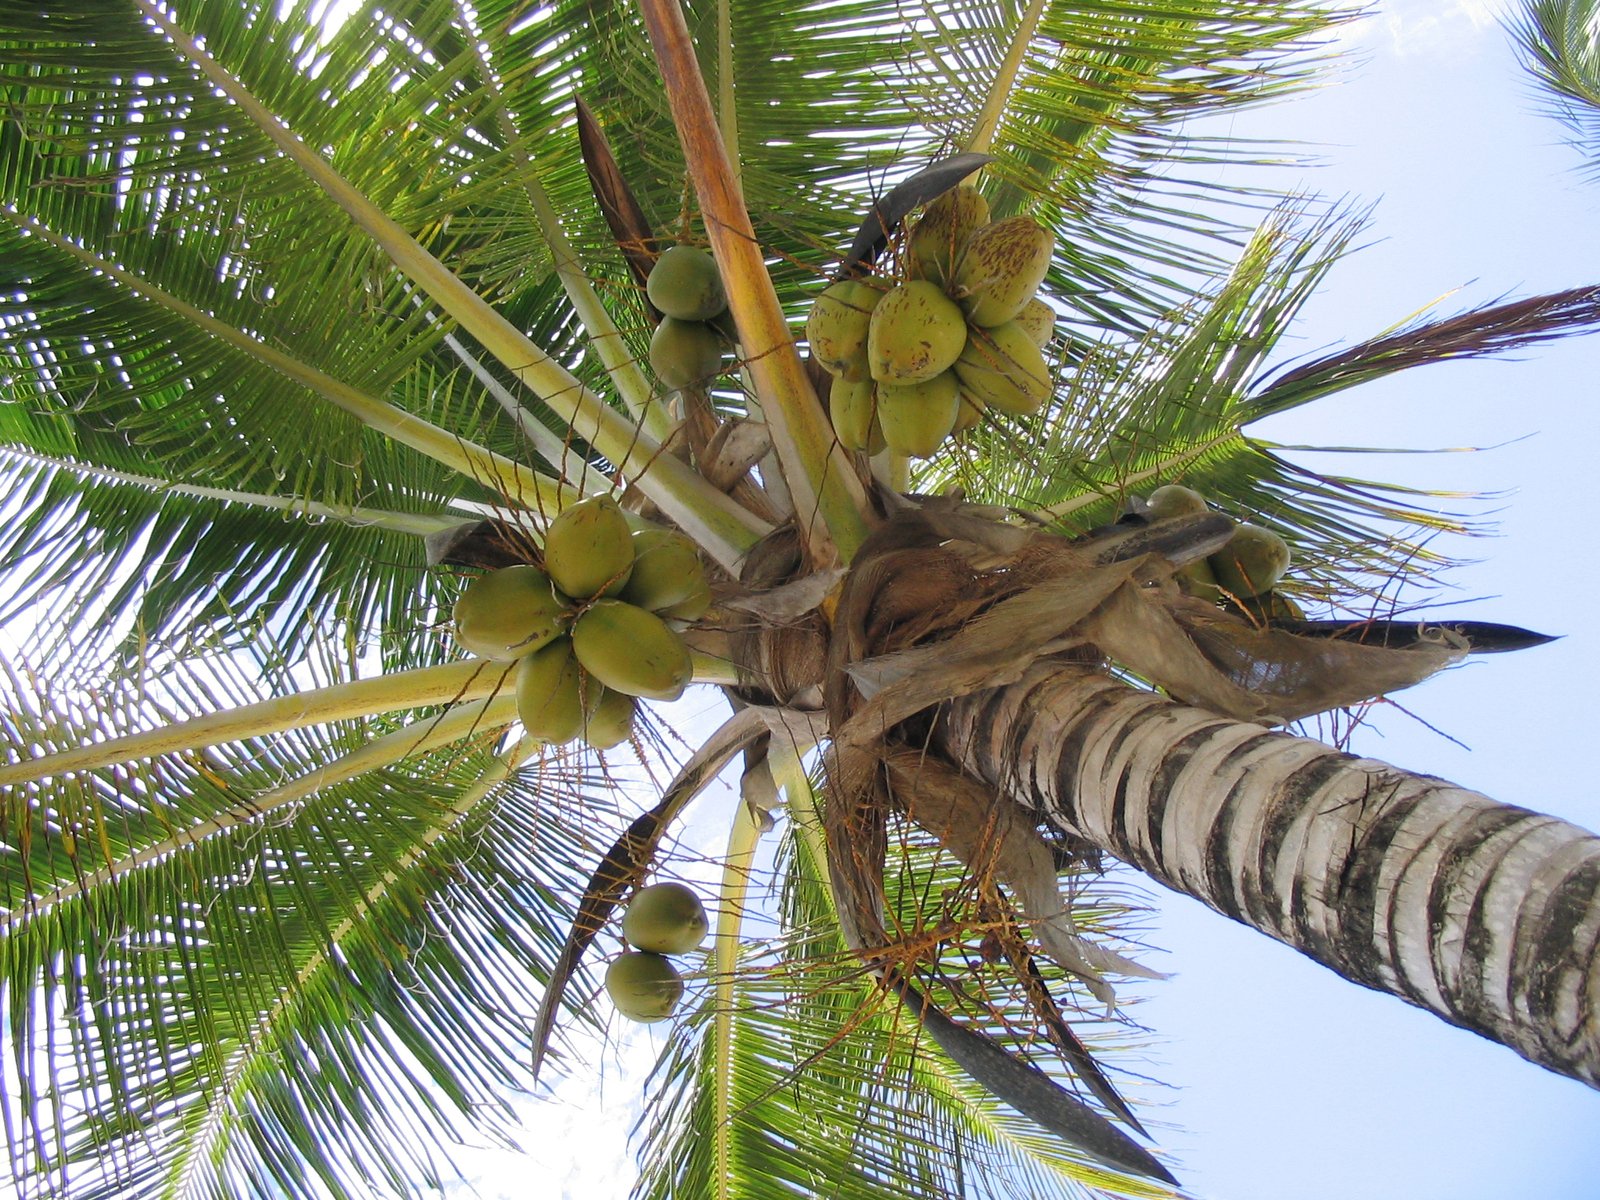 a palm tree with some fruits hanging off the leaves